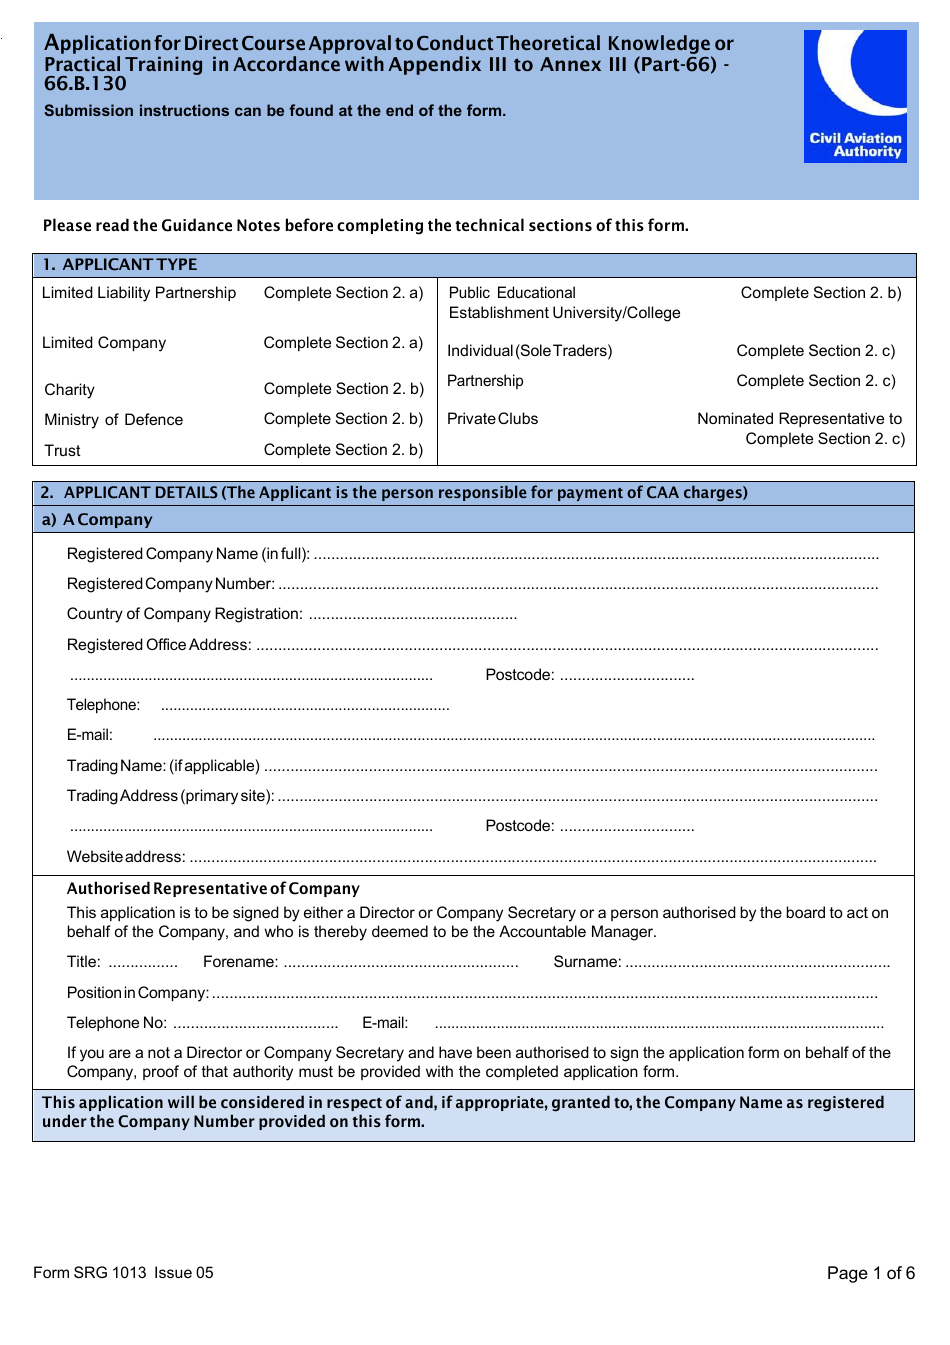 Form SRG1013 Application for Direct Course Approval to Conduct Theoretical Knowledge or Practical Training in Accordance With Appendix Iii to Annex Iii (Part-66) - 66.b.130 - United Kingdom, Page 1